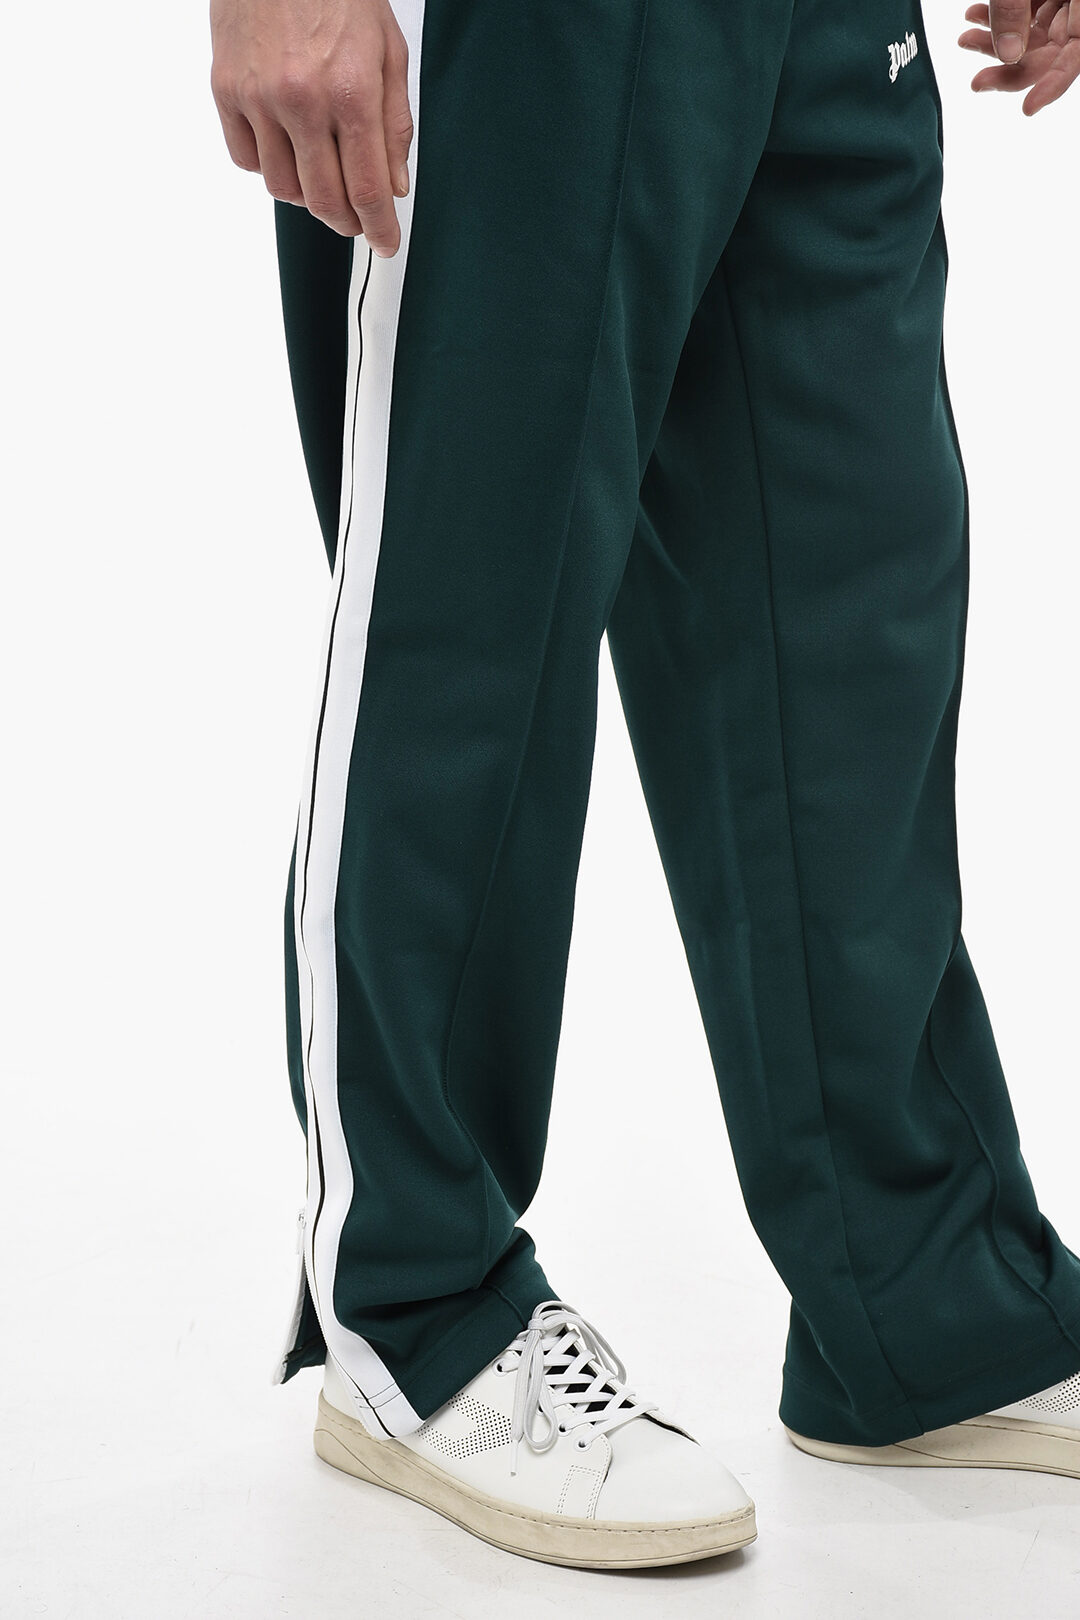 Kappa Ankle Zip Track Pants, Men's Fashion, Activewear on Carousell